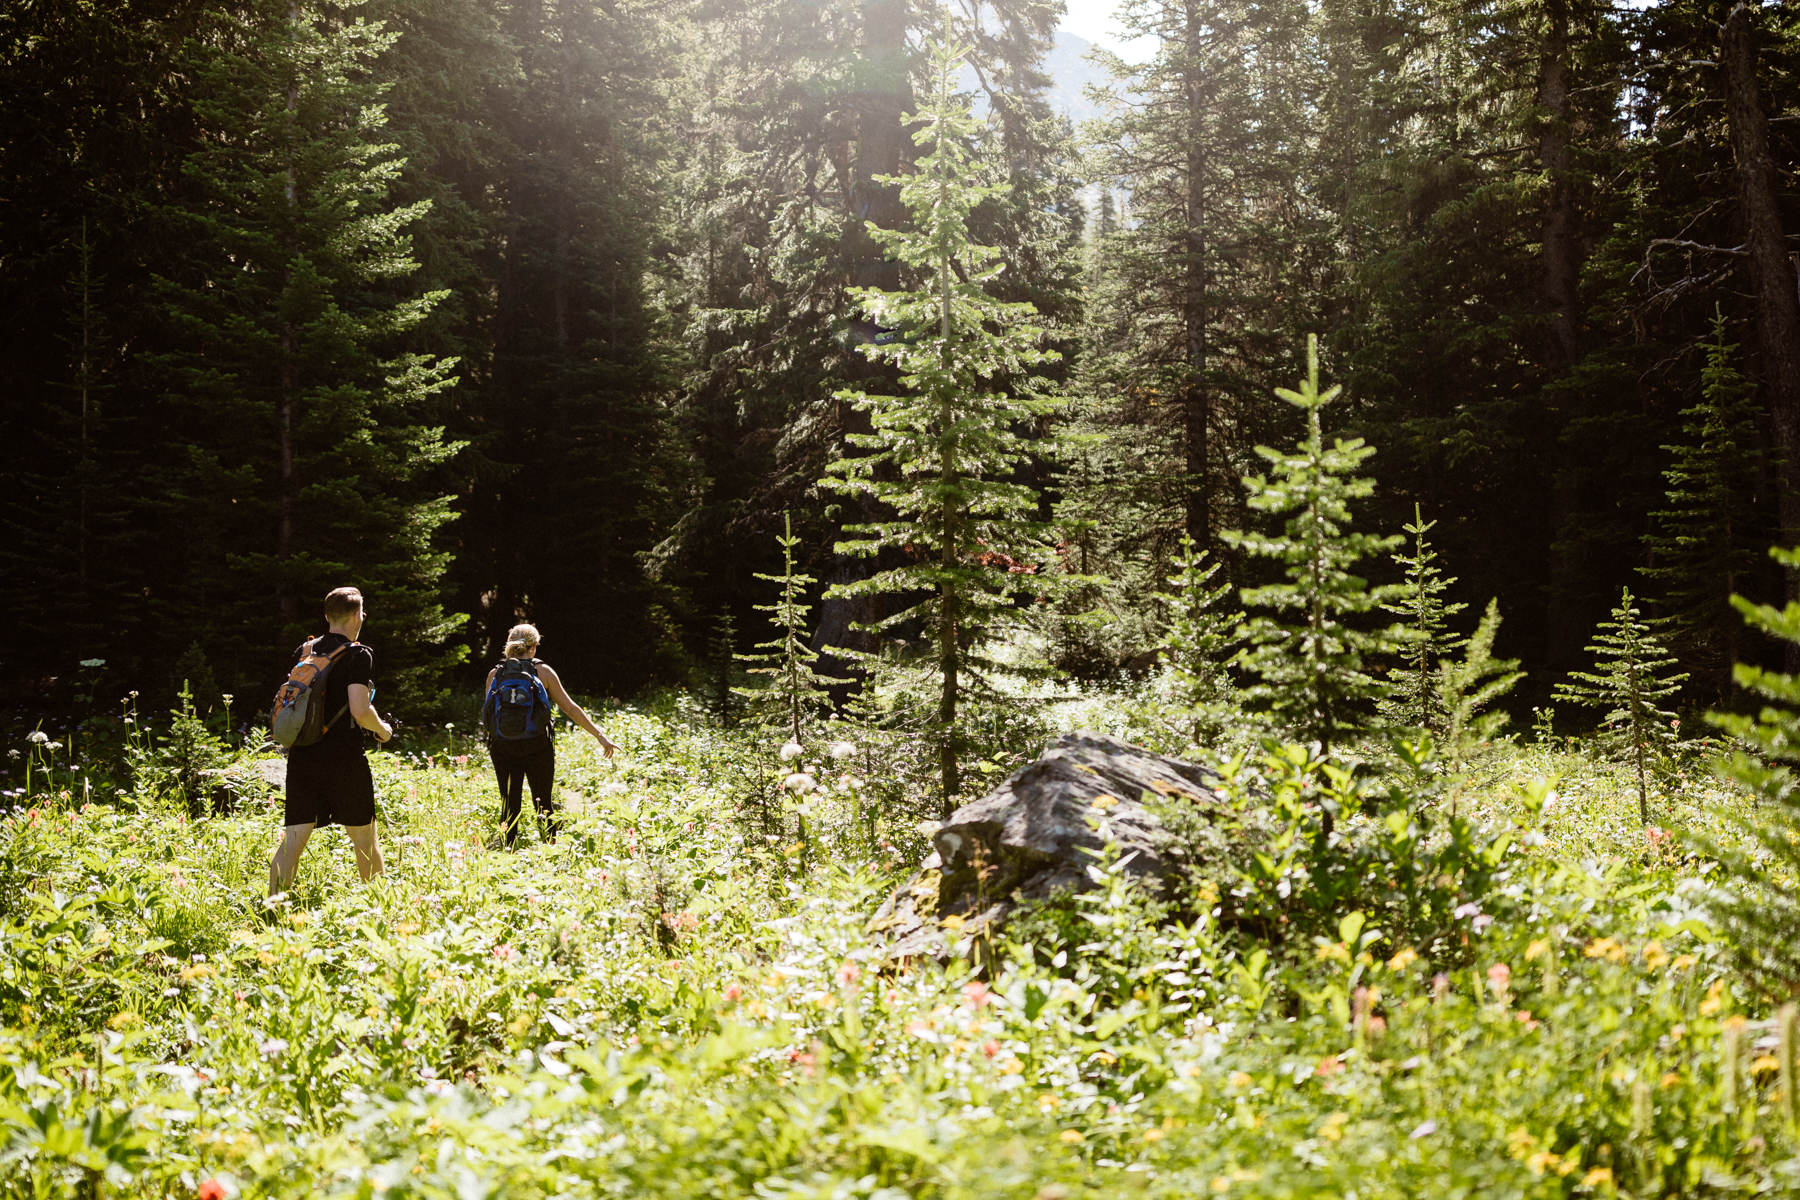 Adventure Elopement Photographers at a Hiking Wedding near Invermere - Photo 3